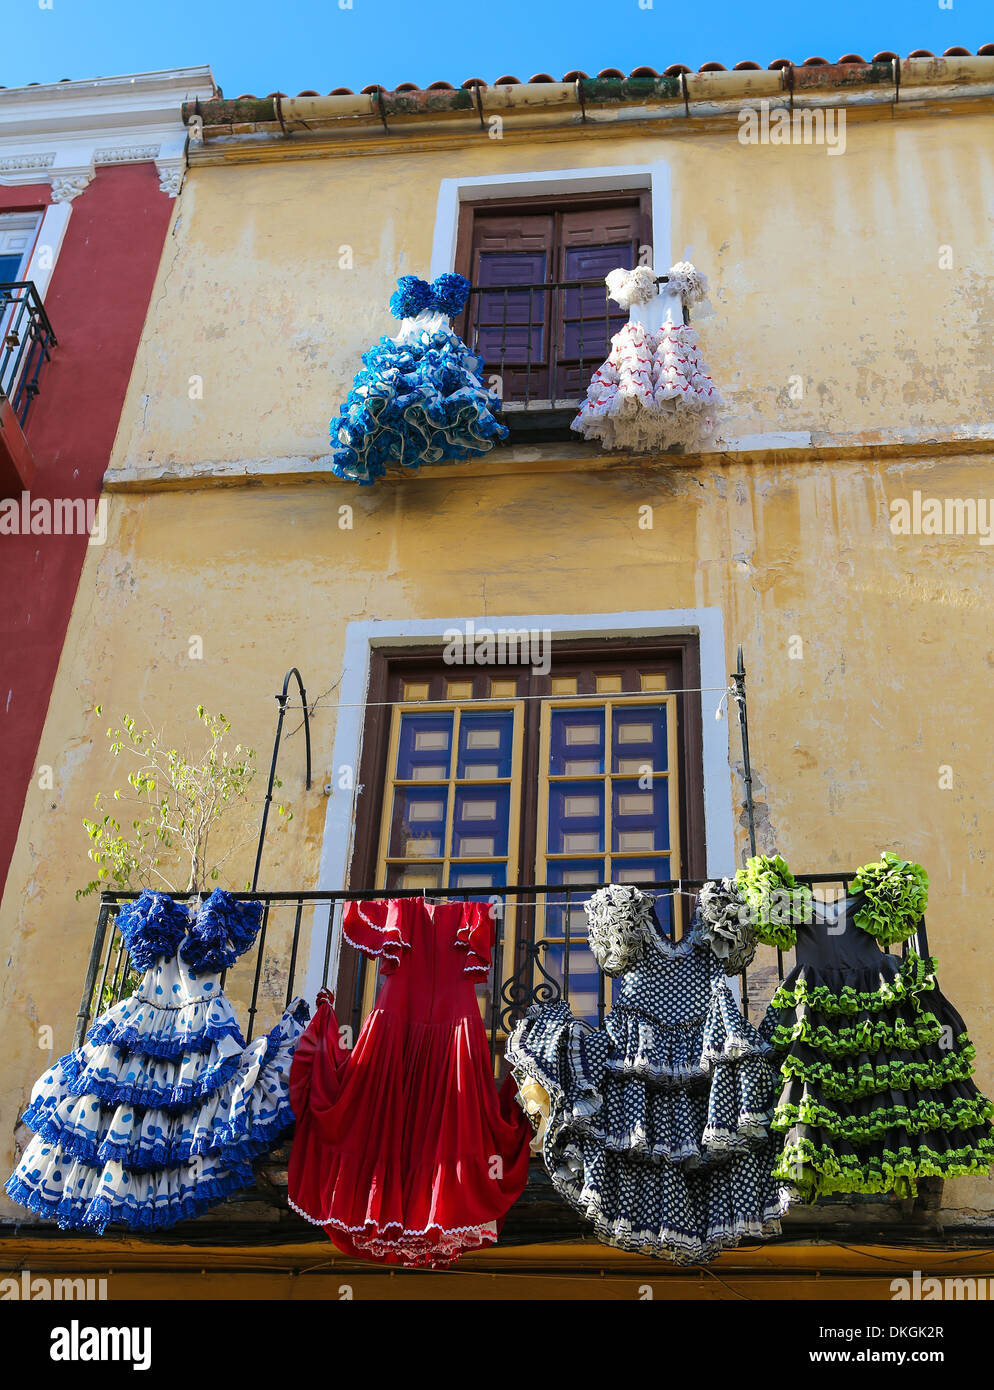 Traditional flamenco dresses at a house in Malaga, Andalusia, Spain. Stock Photo